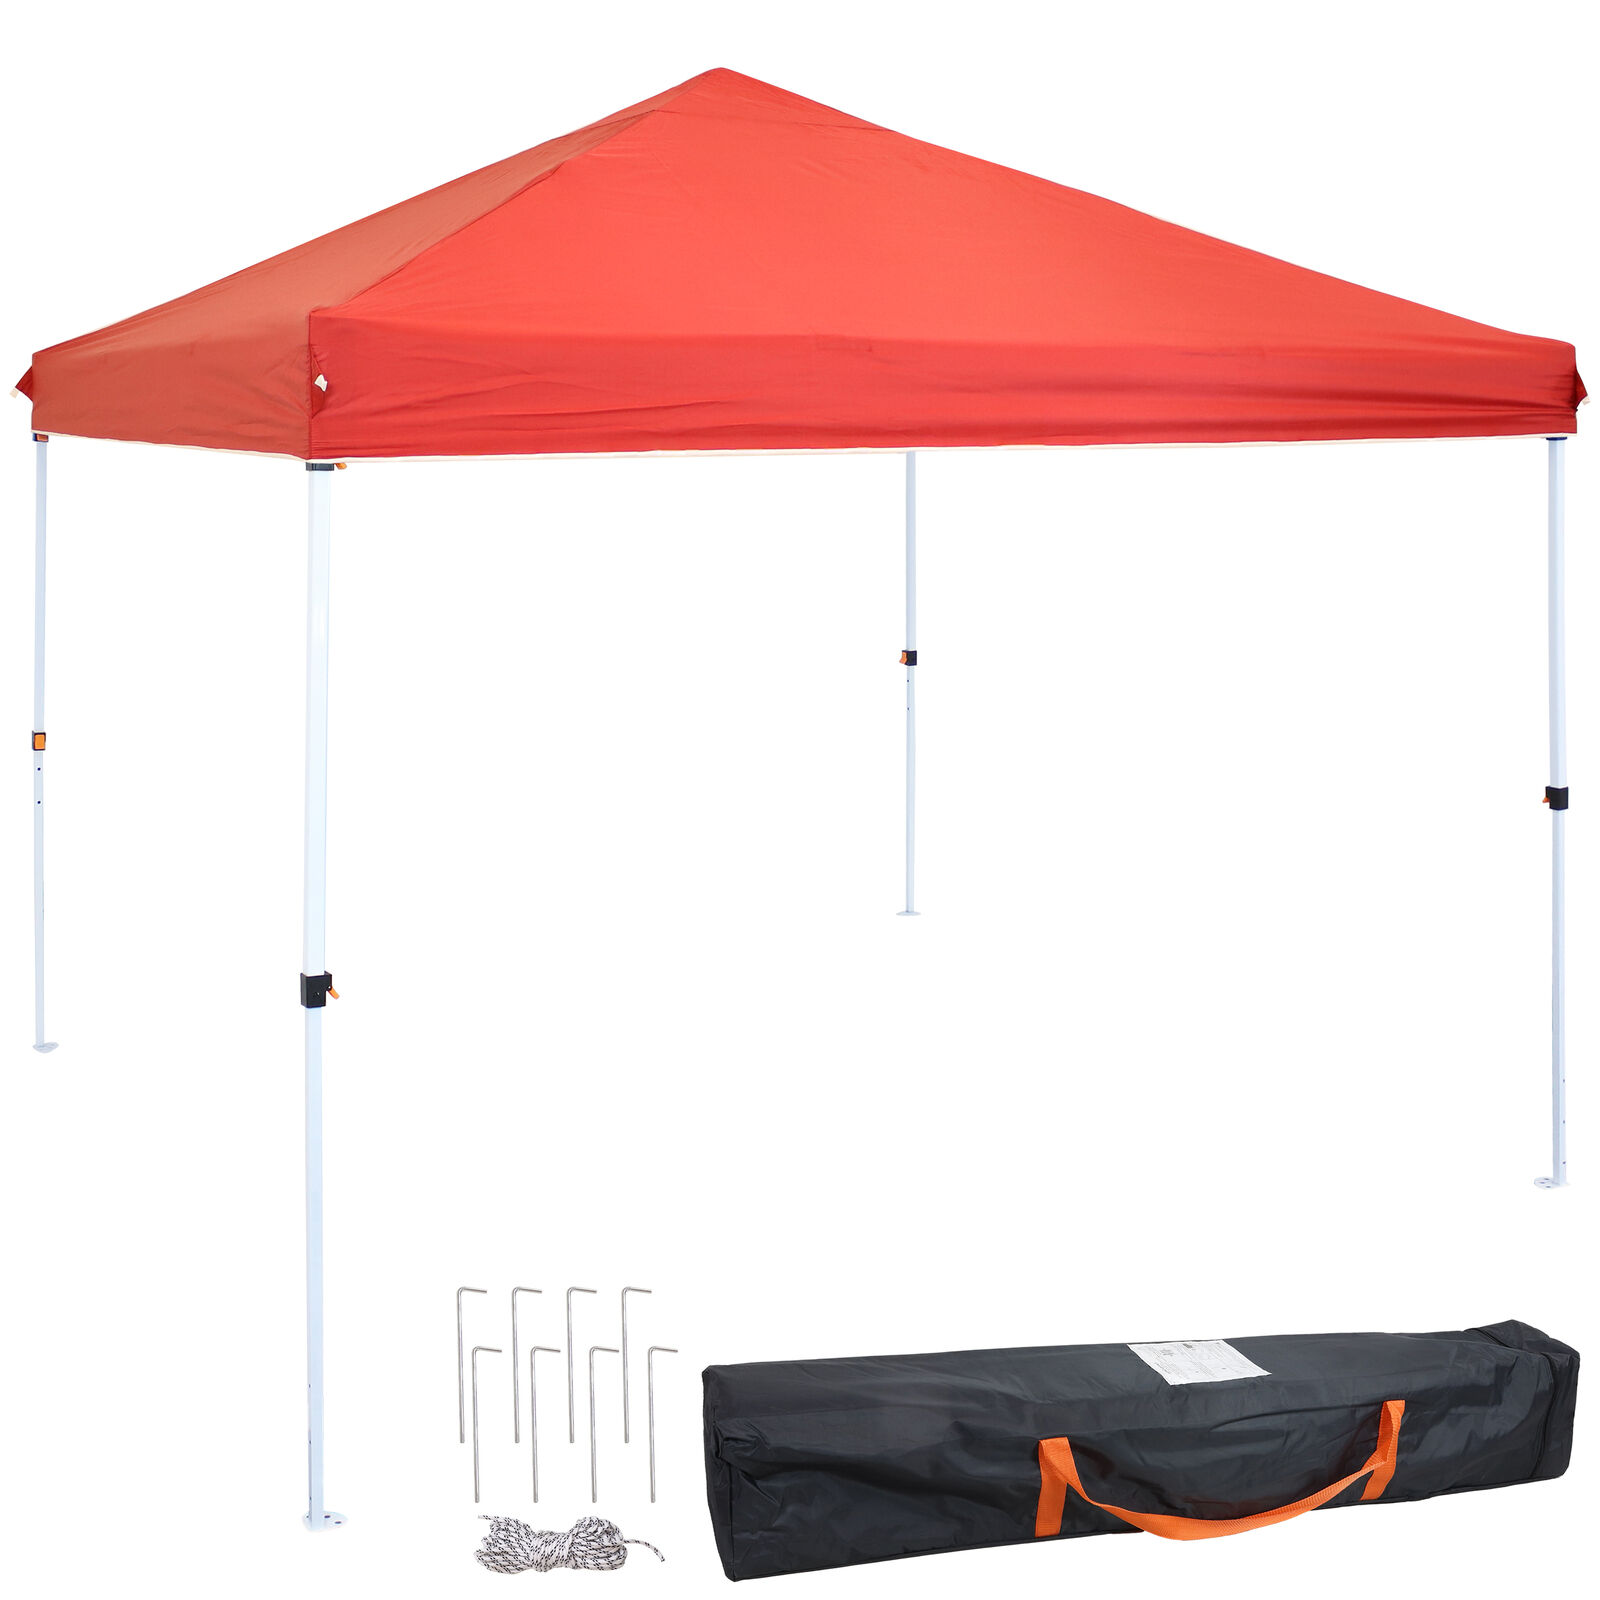 Standard Pop-Up Canopy with Carry Bag - 12 ft x 12 ft - Red by Sunnydaze